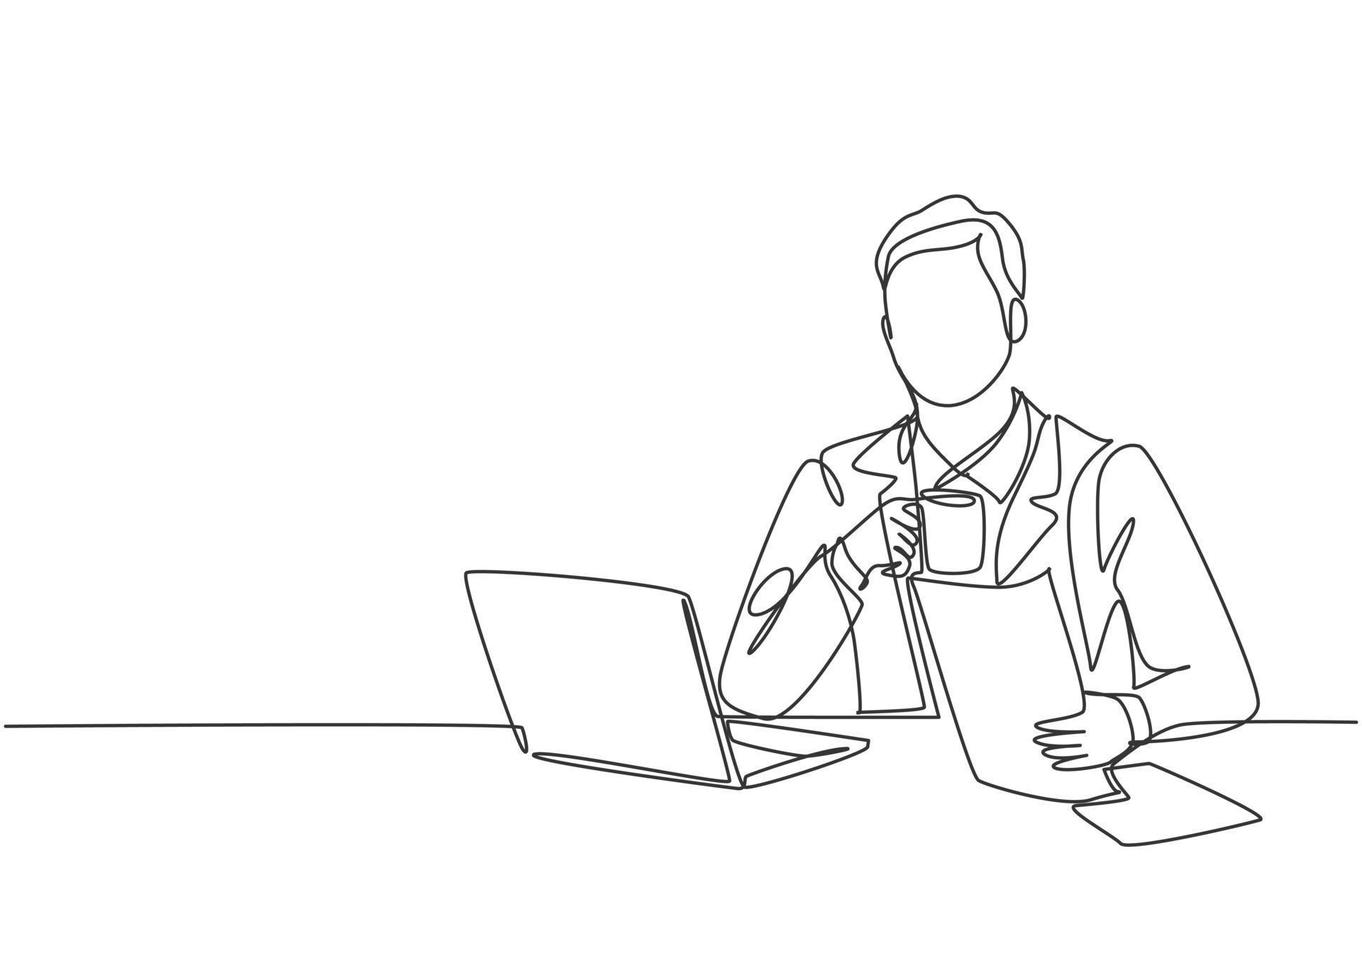 One continuous line drawing of young happy manager reading annual report from public accounting firm while holding a mug of coffee. Drinking coffee or tea concept graphic design vector illustration